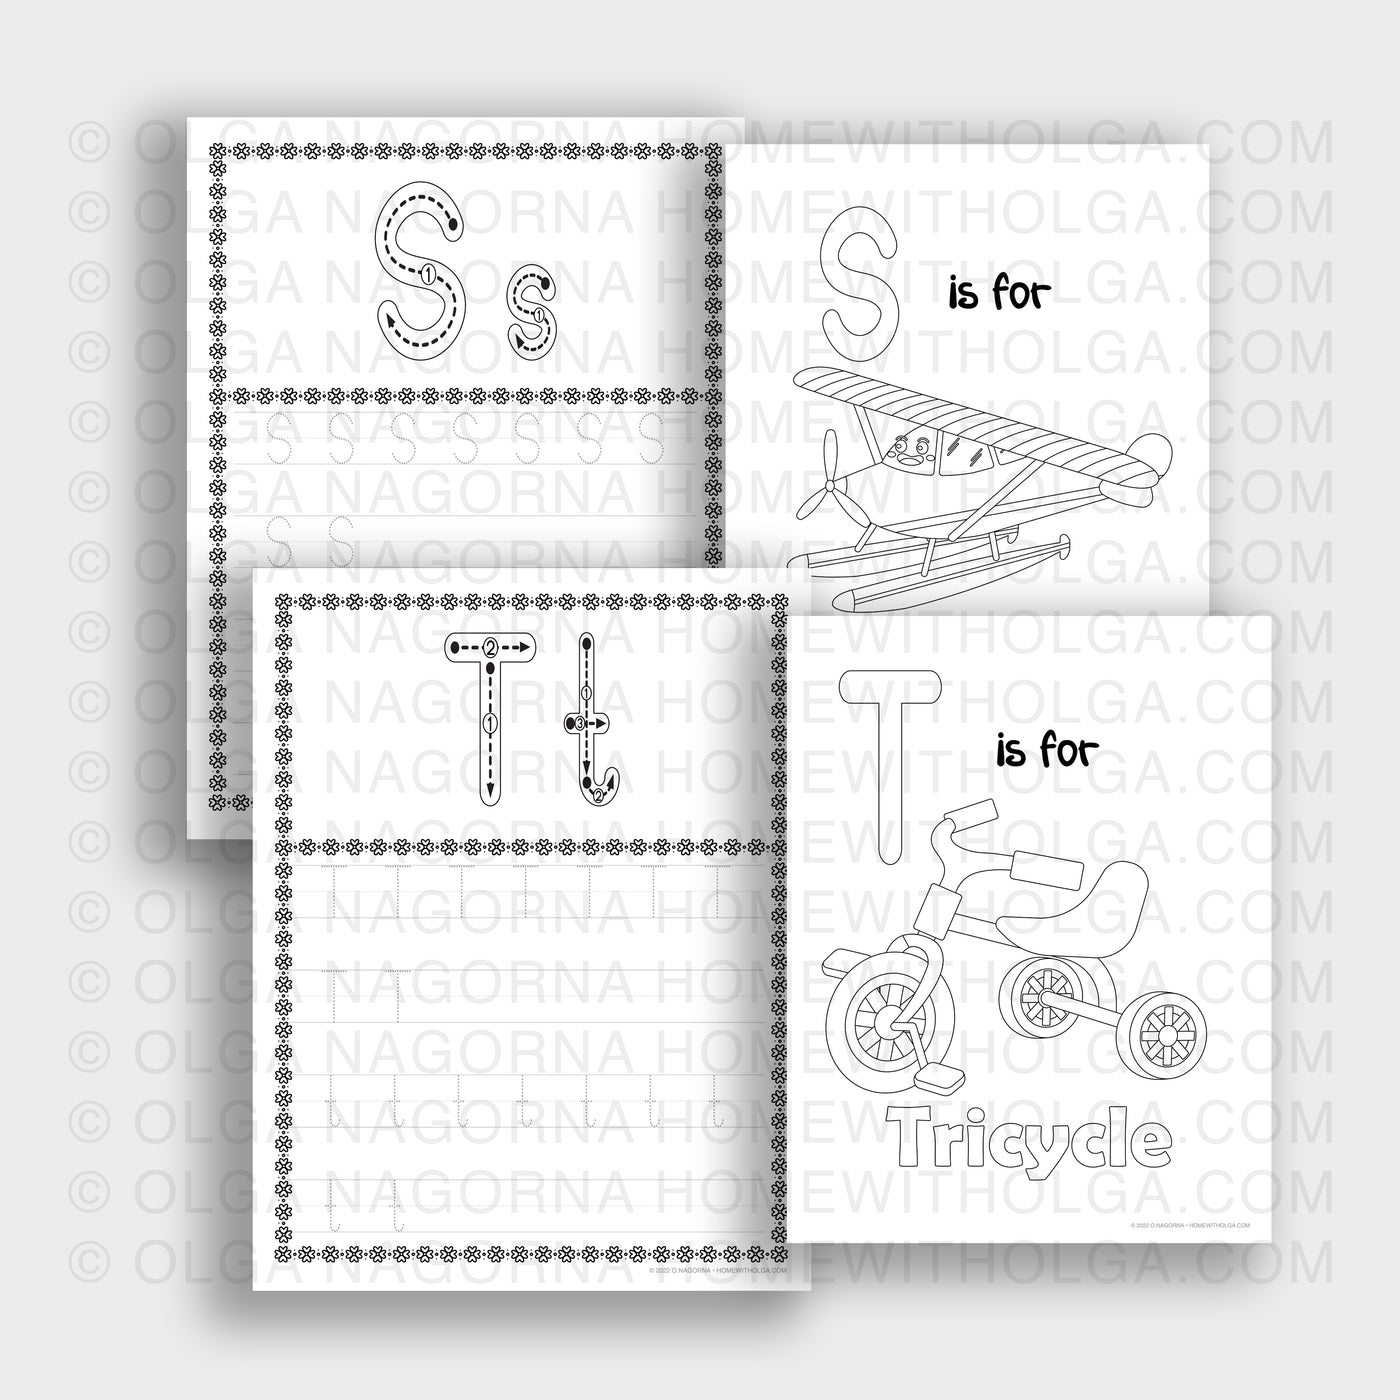 A set of full English alphabet tracing. Each letter comes with a coloring page that goes with each letter.